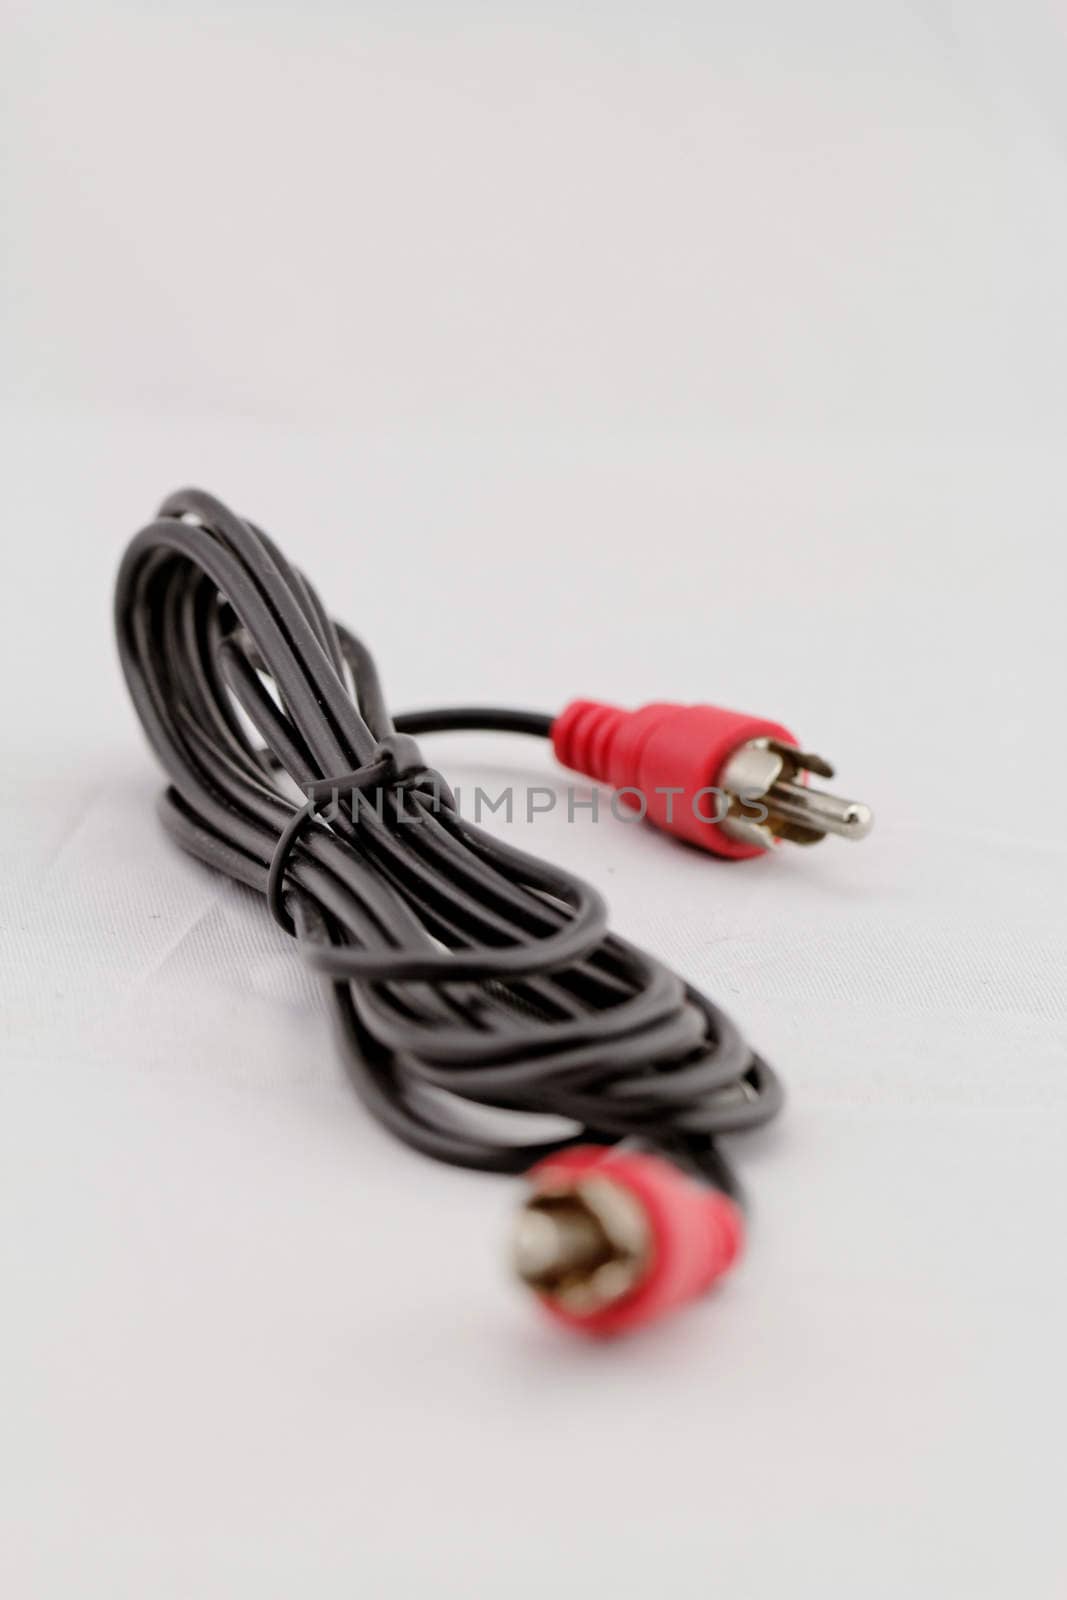 only red audio RCA cable on a white background (left)